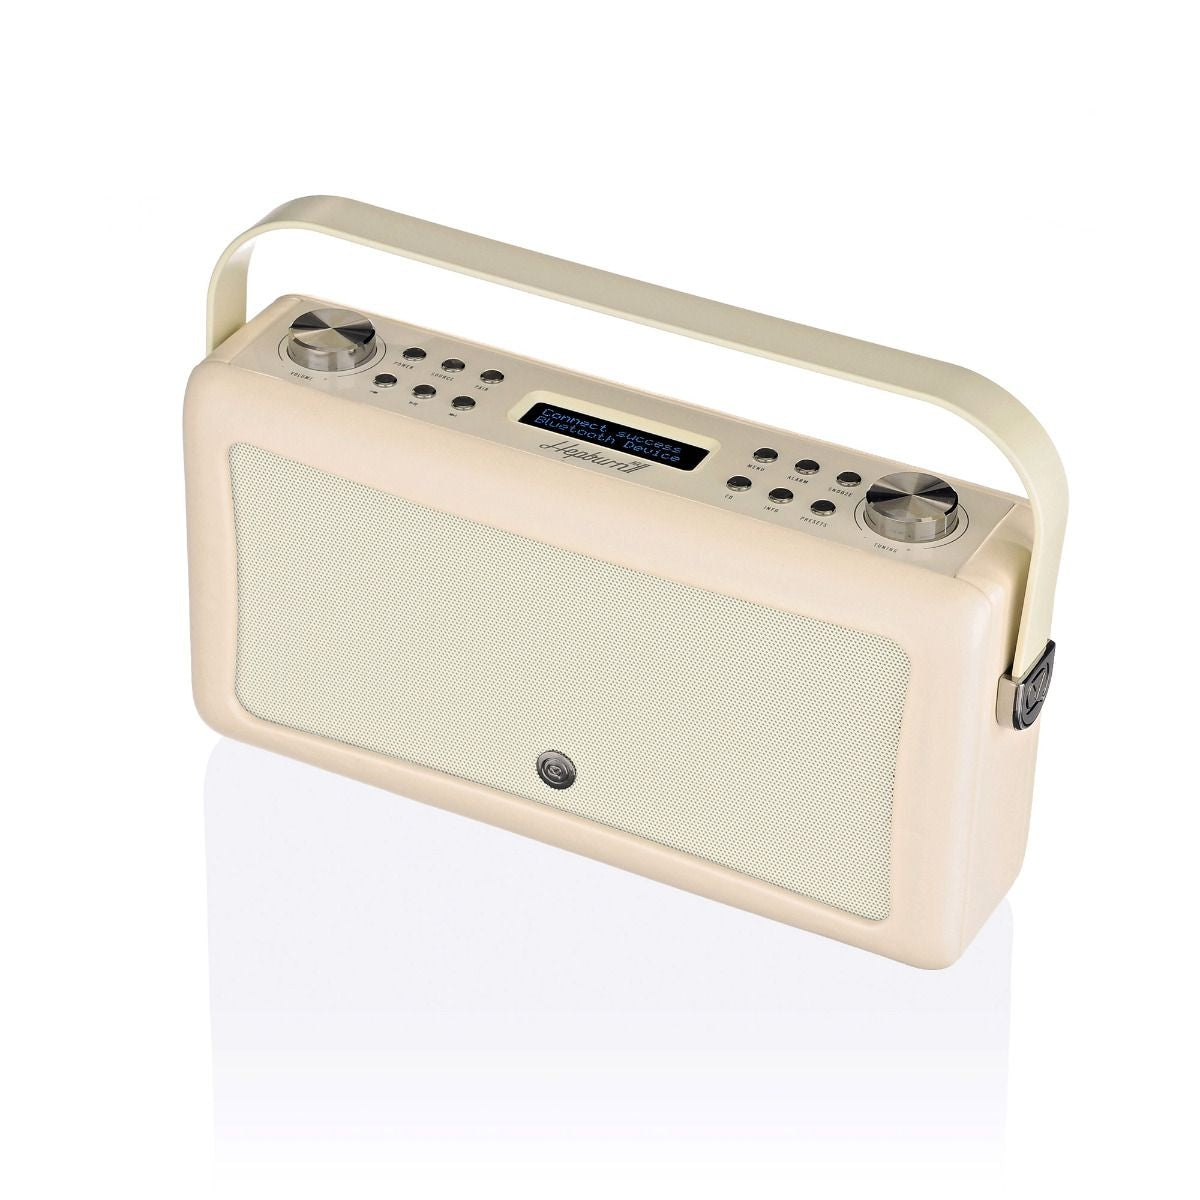 VQ Hepburn Mk II  Portable DAB+/FM Radio & Bluetooth Speaker with Rechargeable Battery Pack in Cream - 4